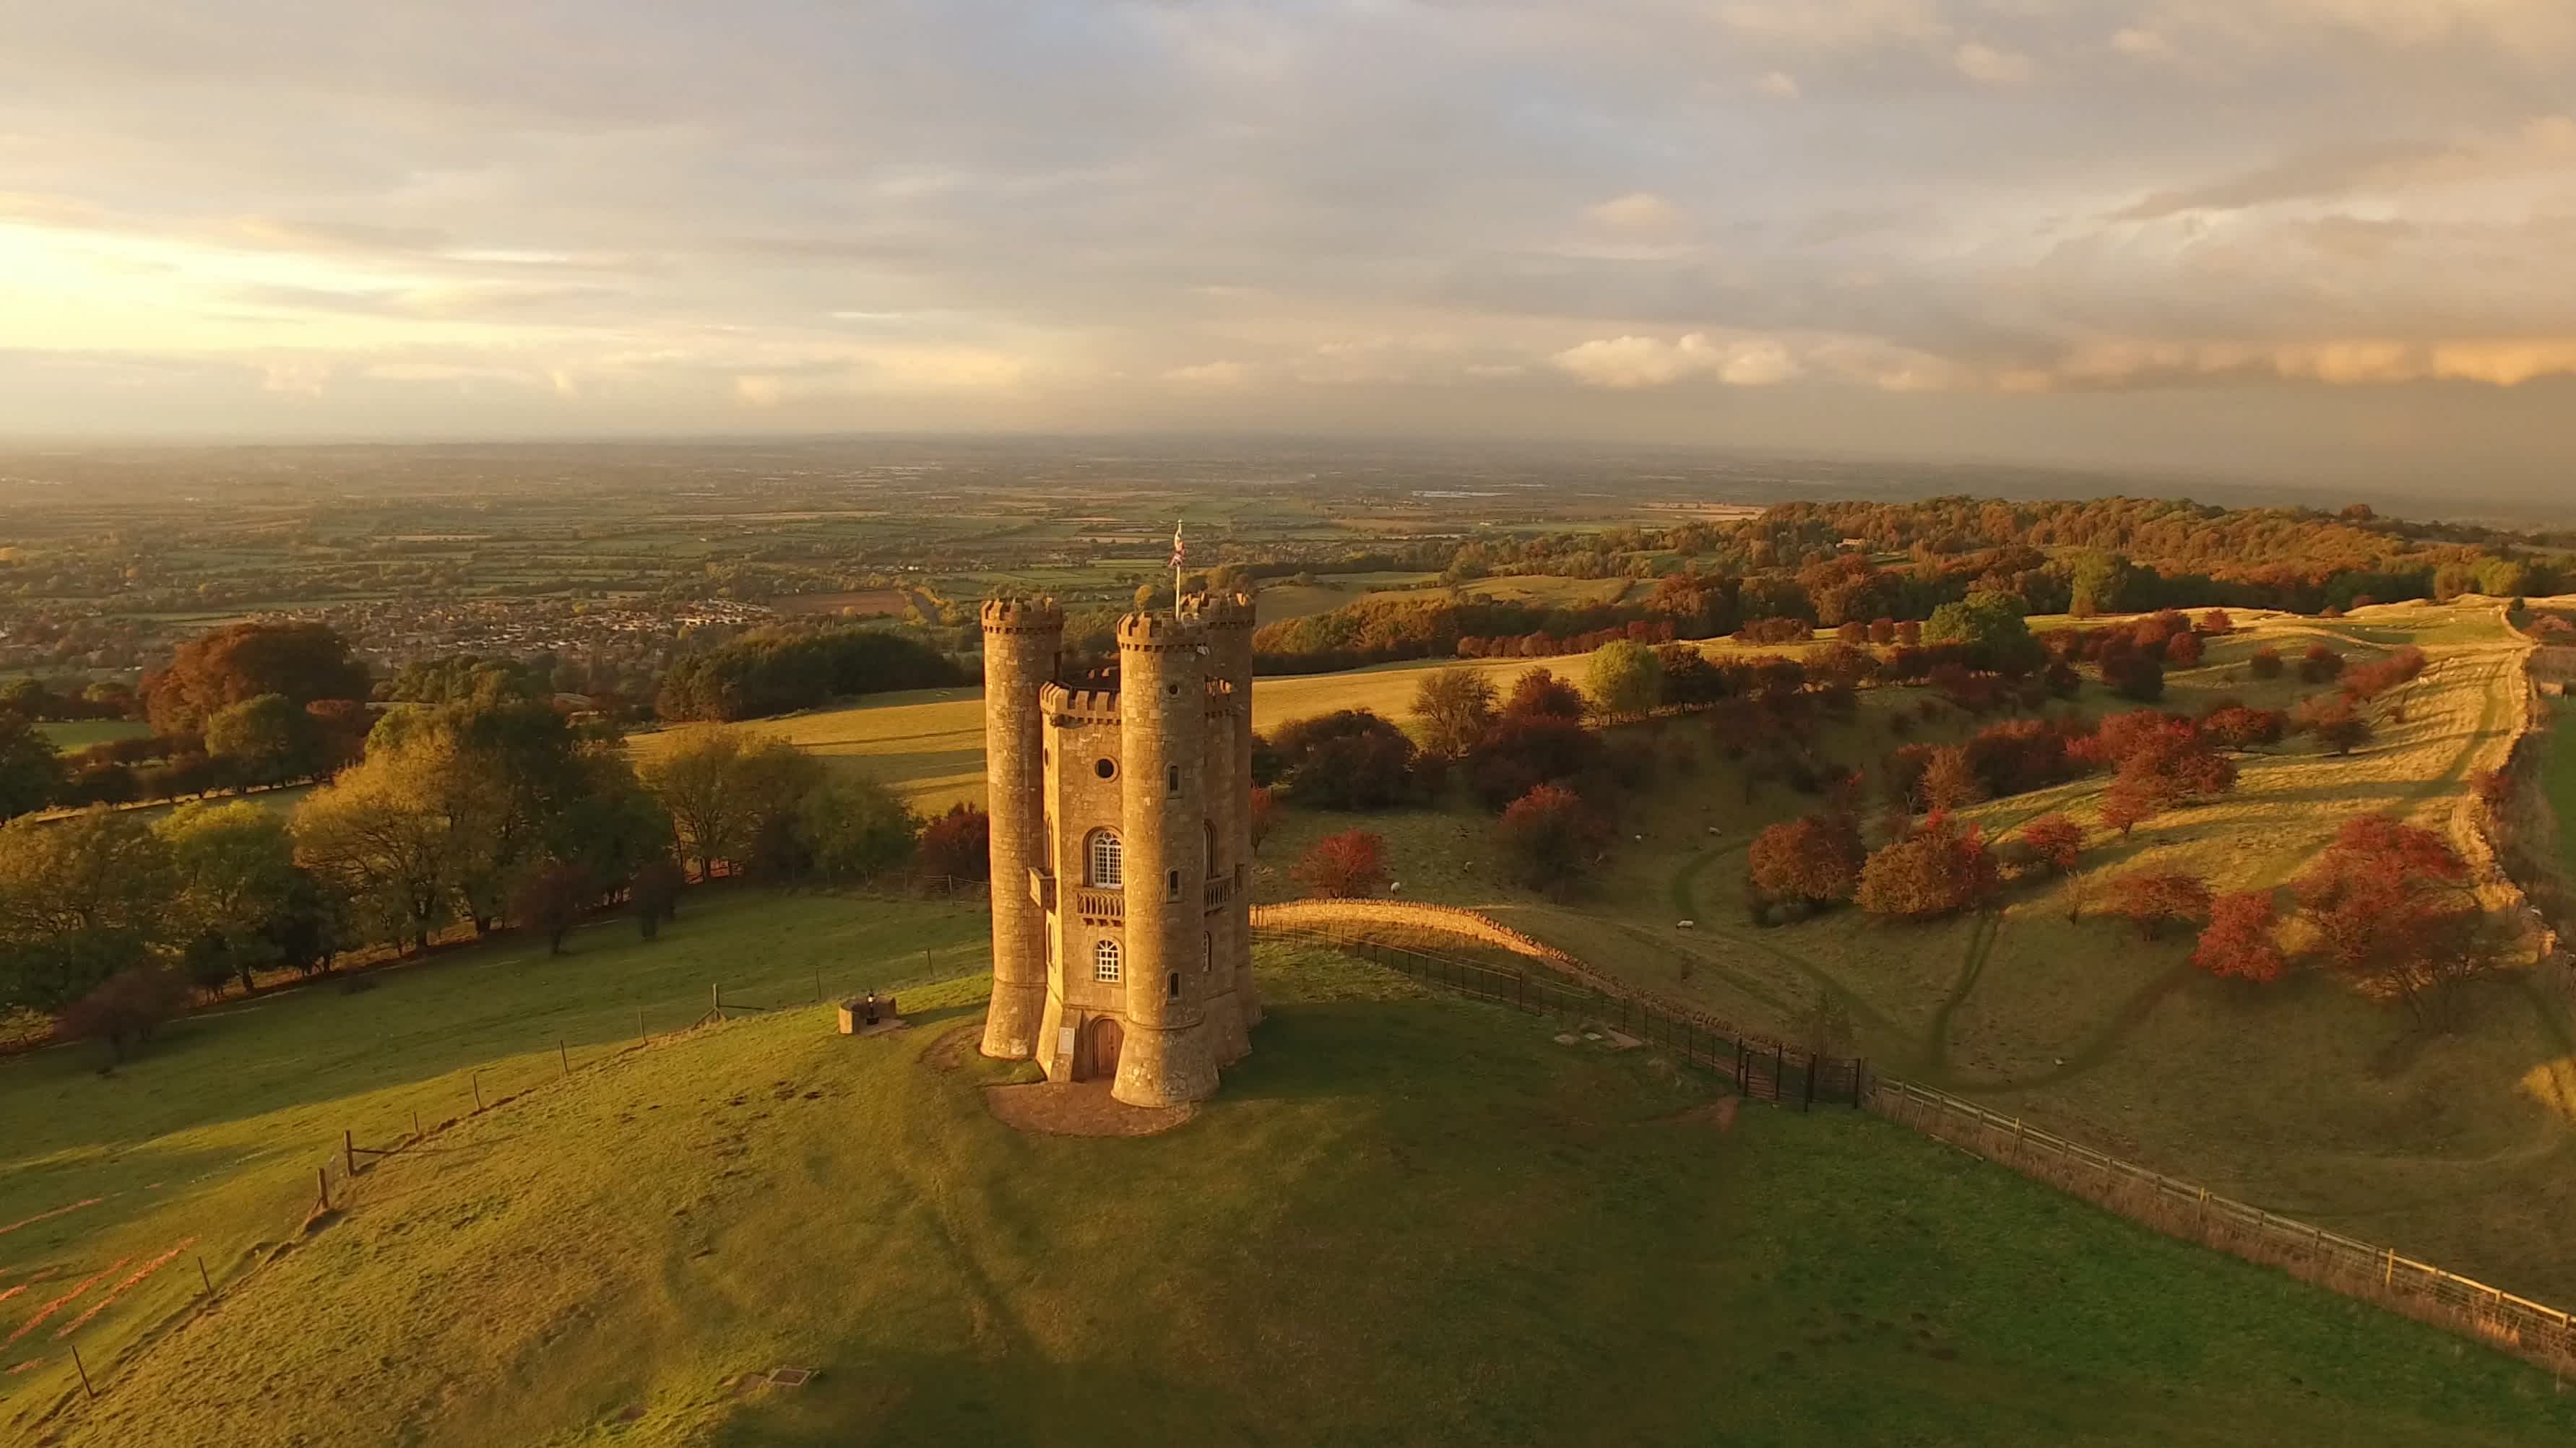 Broadway Tower in Cotswolds surrounded by woods glowing in autumn colors, England, Great Britain.